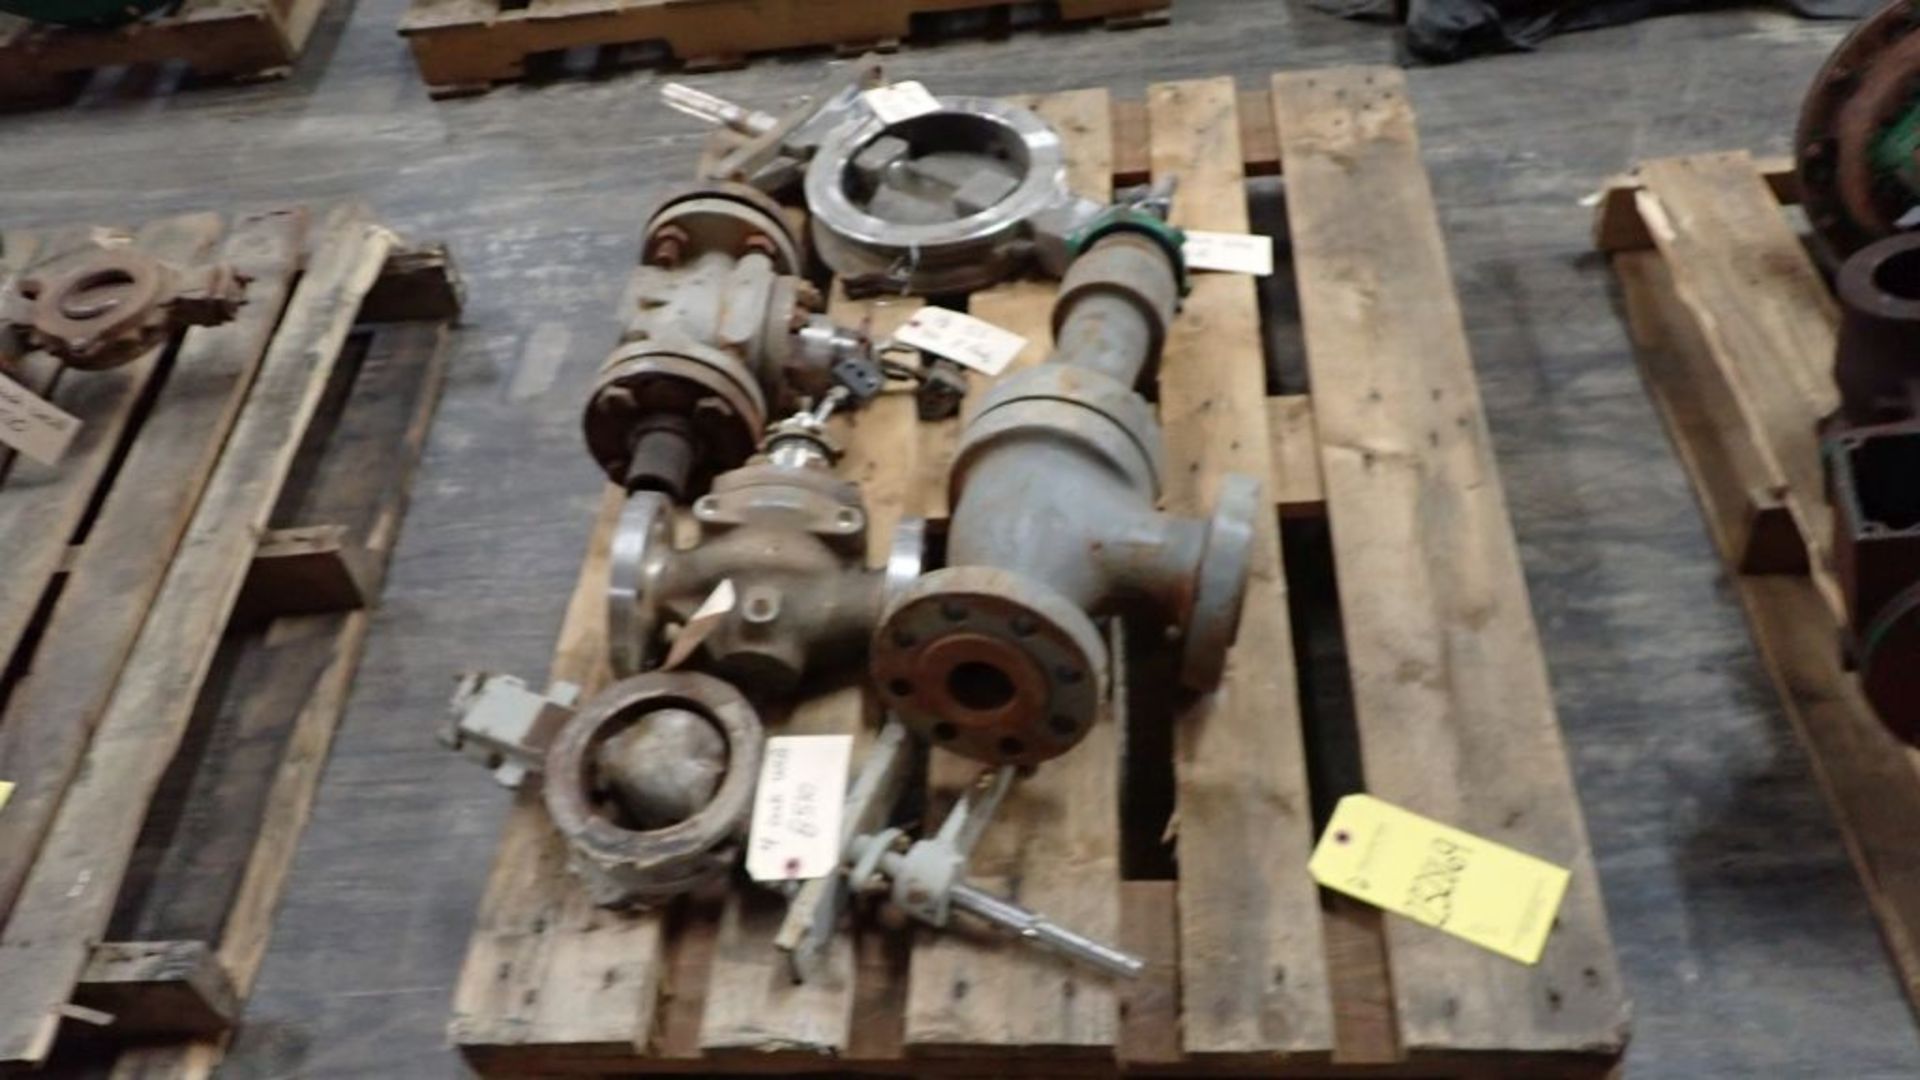 Lot of (5) Fisher Valves | 8" SS 8550; 2" 600 WCB; (2) 1-1/2" SS 300 E-Body; 4" WCB 8510; Tag: